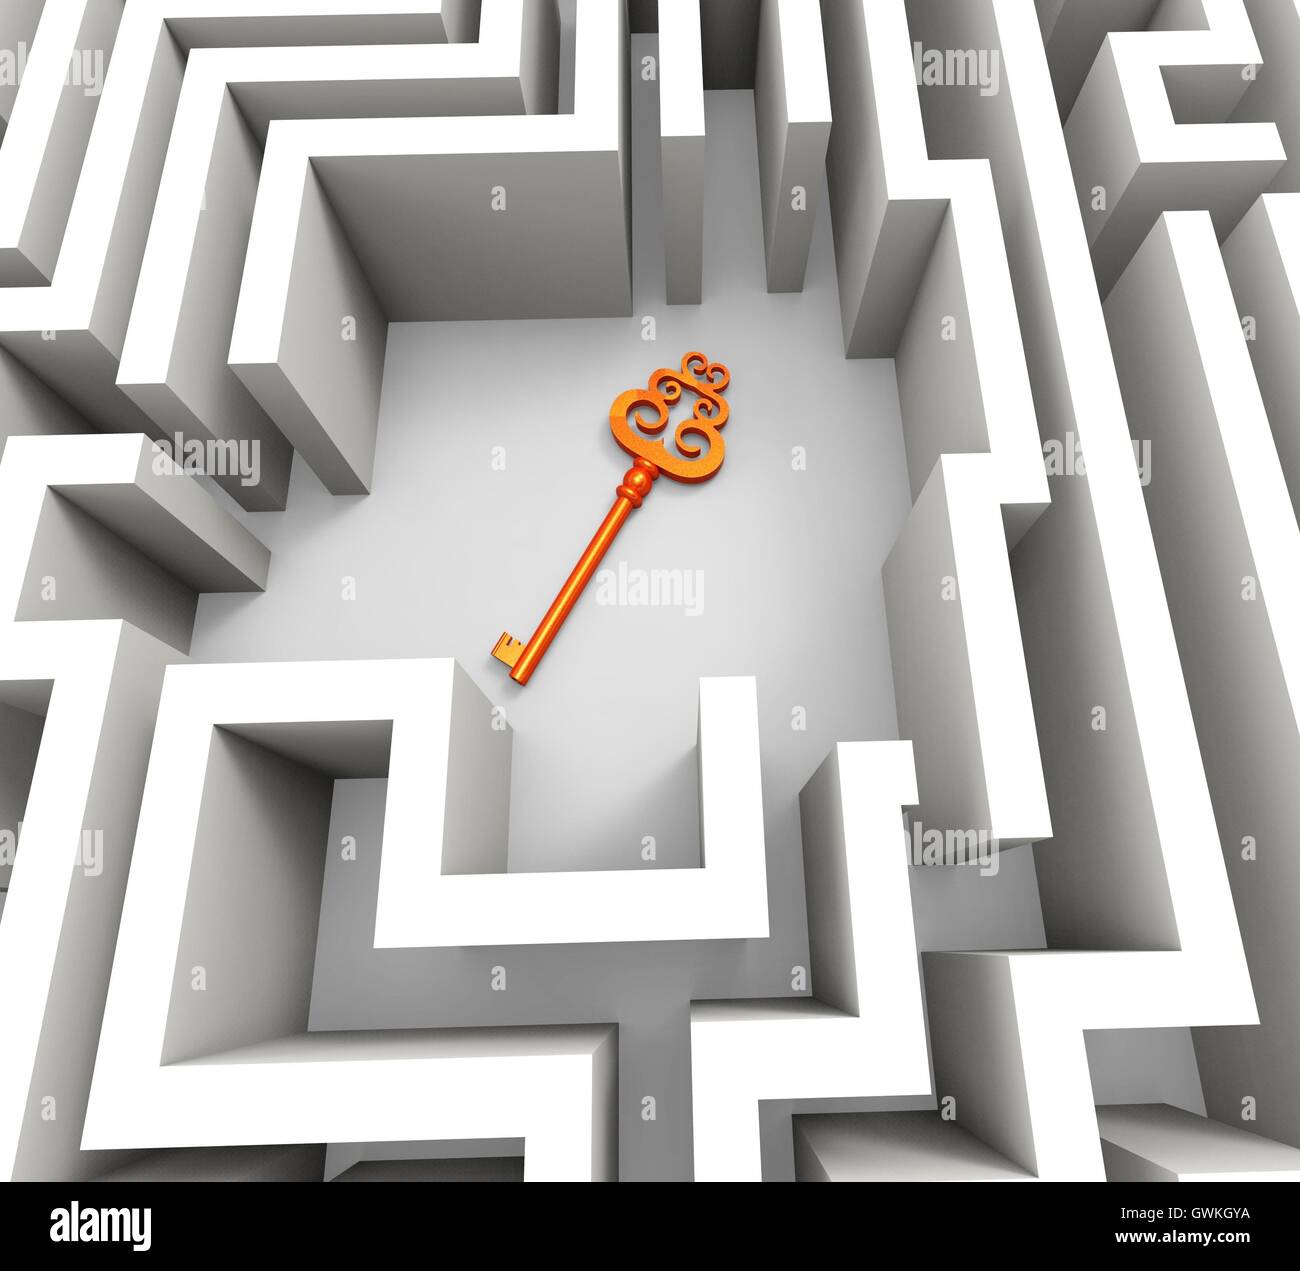 Key In Maze Shows Security Solution Stock Photo